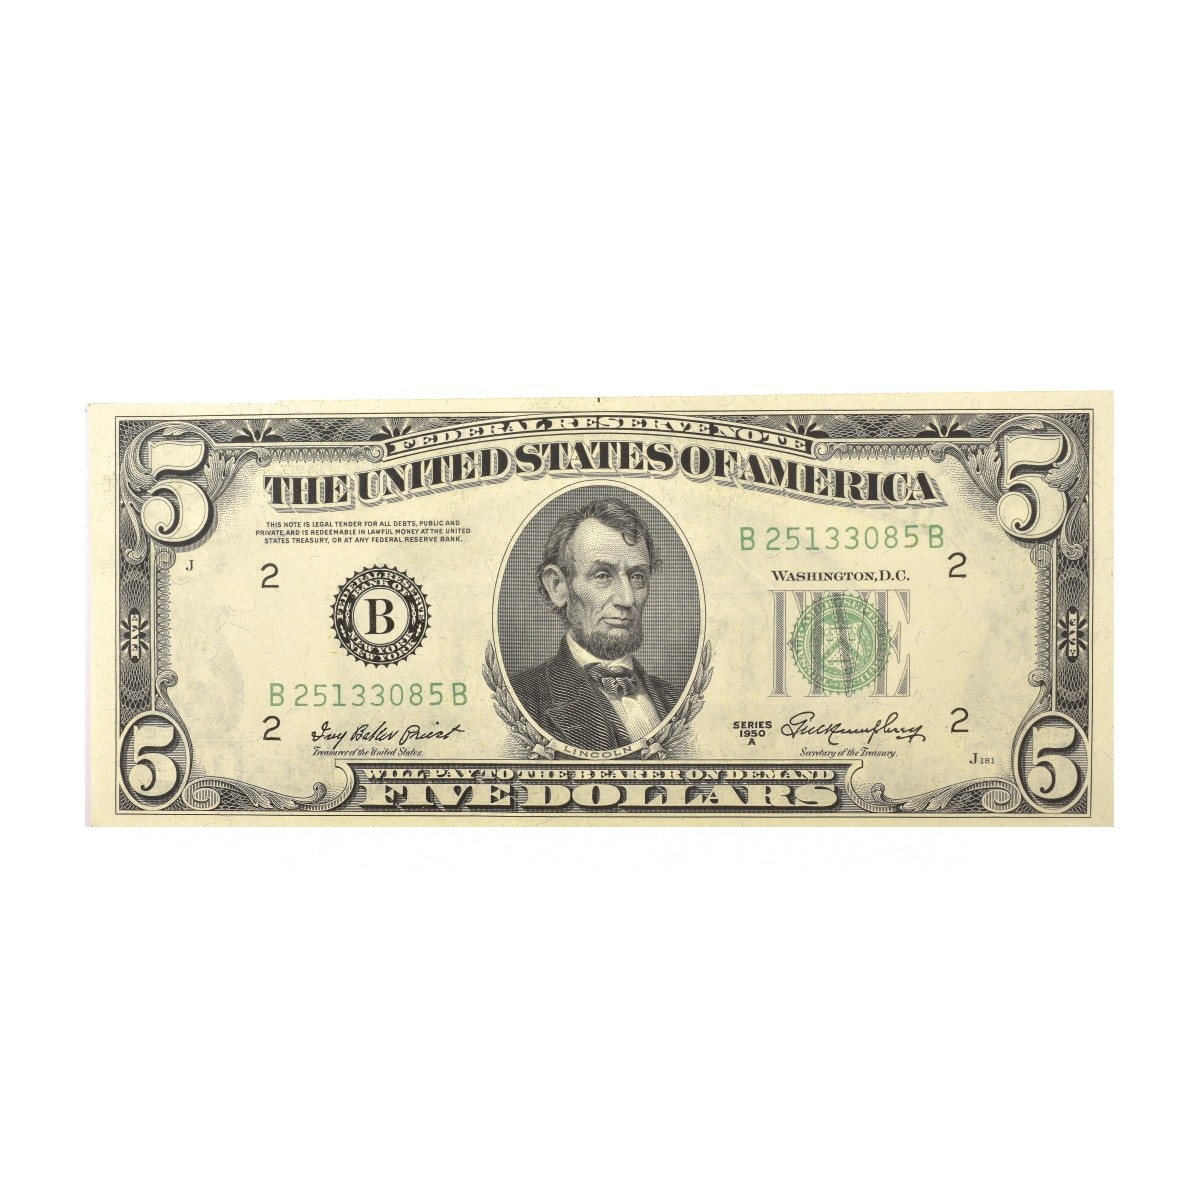 (14) US $5.00 Paper Currency